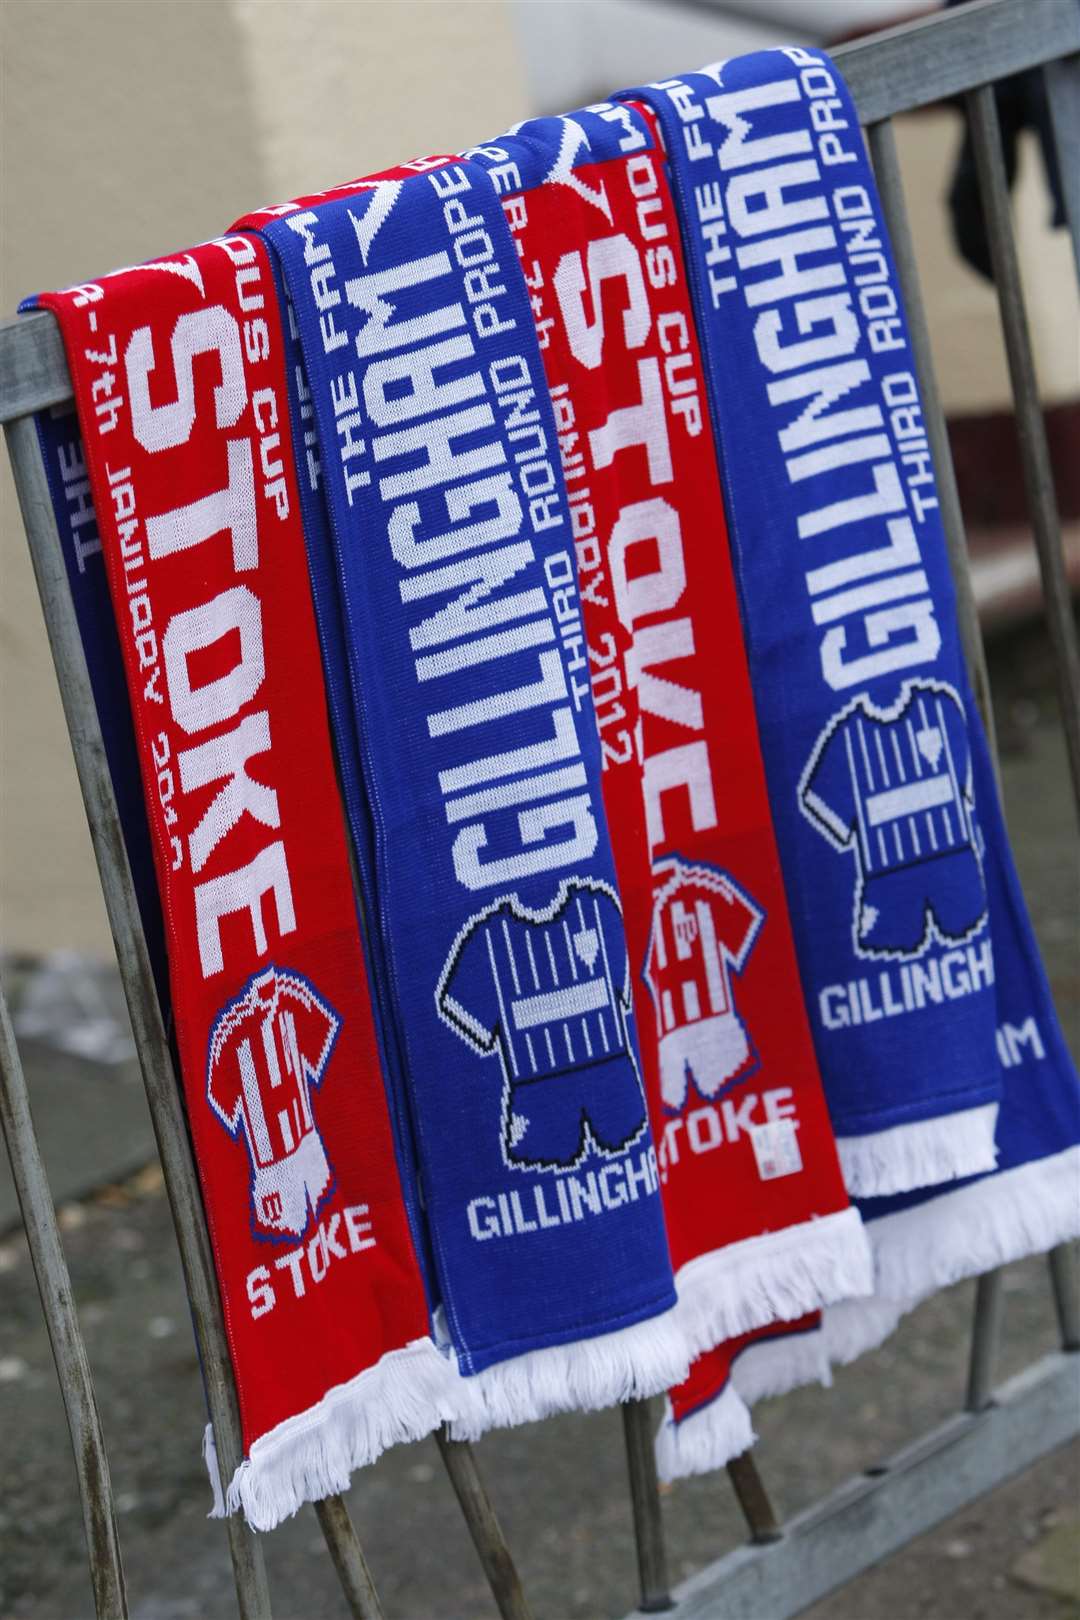 Gillingham will travel to Stoke for round three of the Carabao Cup